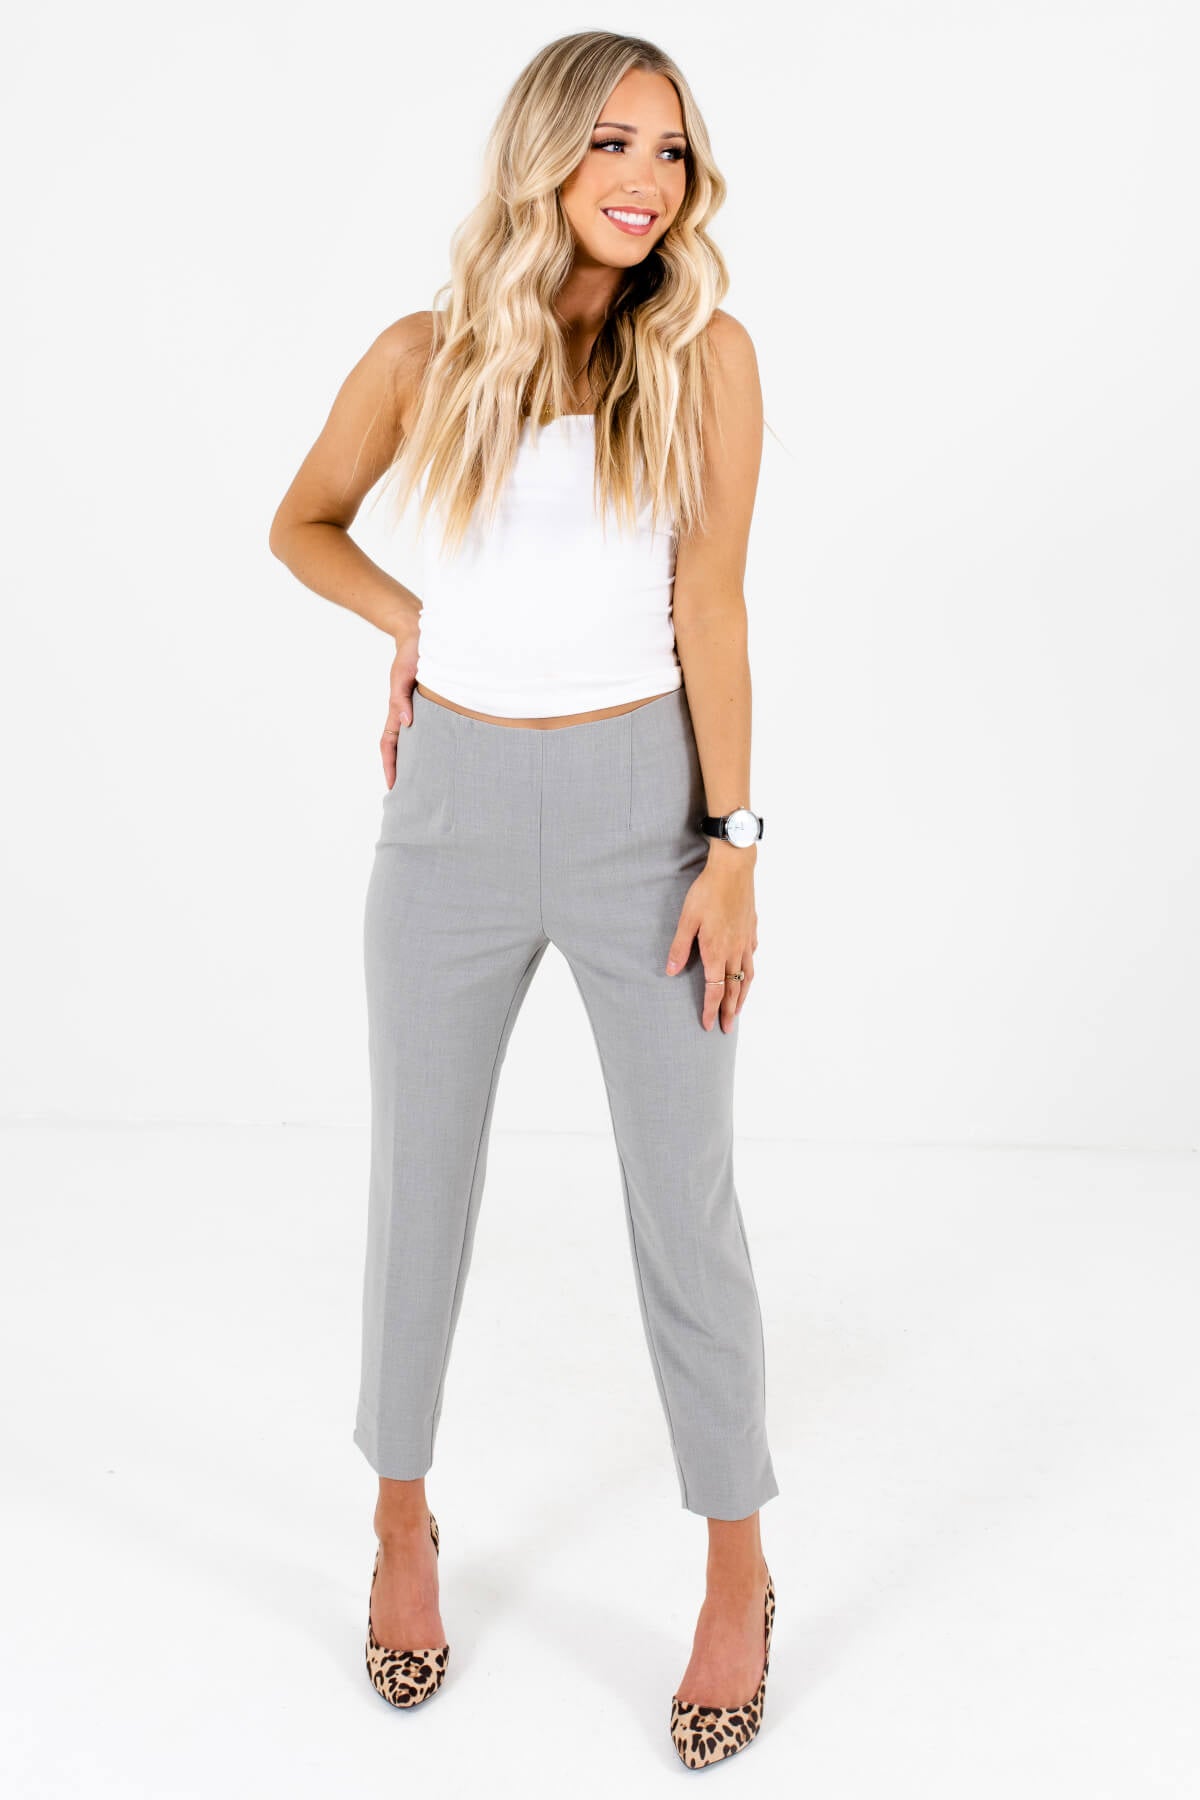 Strictly Business Black High Waisted Trouser Pants  Business casual  outfits for work, Stylish work outfits, Business outfits women